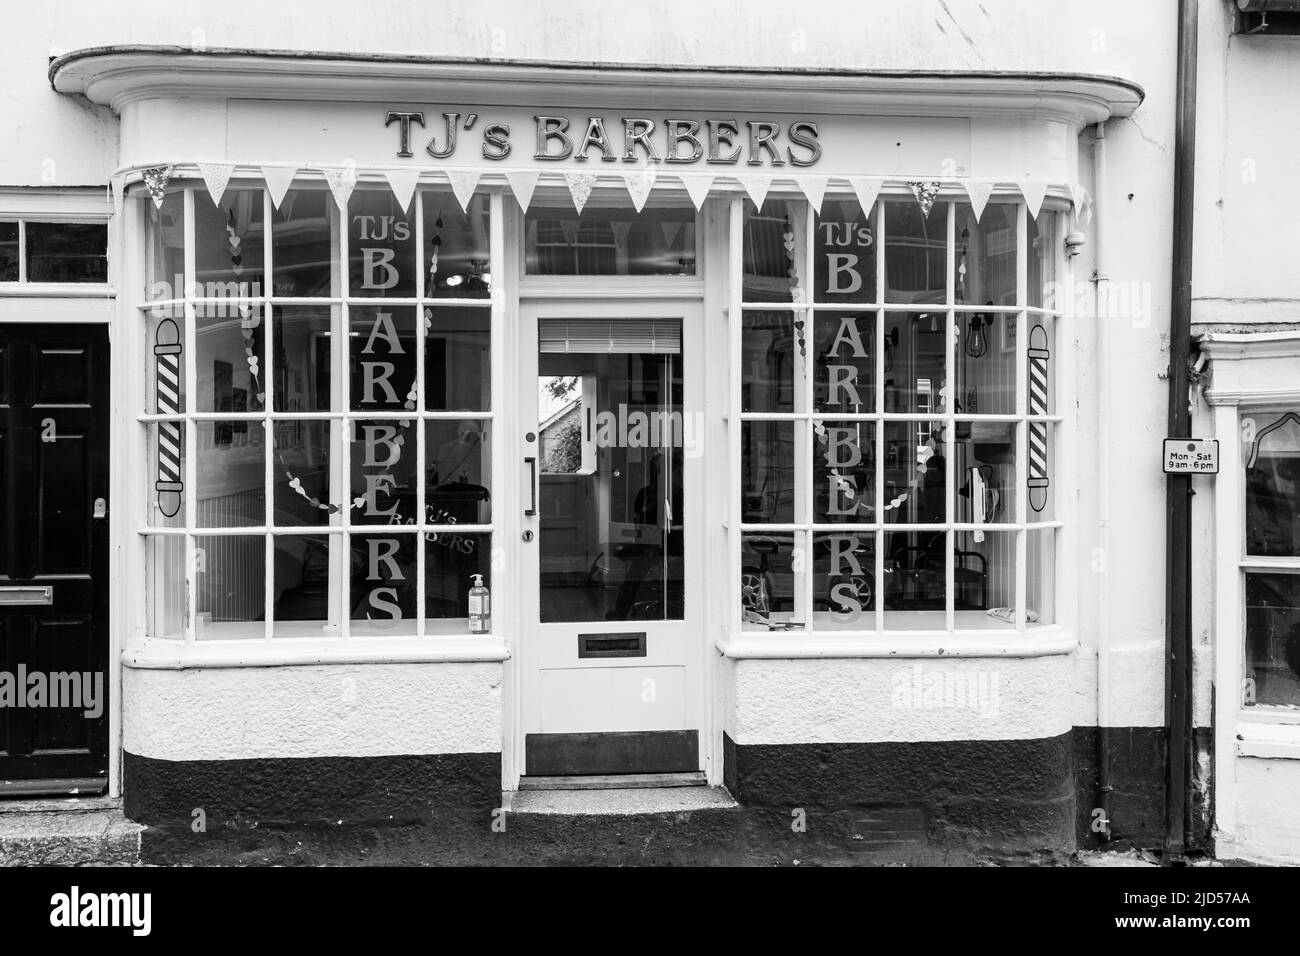 Retail outlets (TJ's Barbers) in Meneage Street, Helston, Cornwall, England Stock Photo